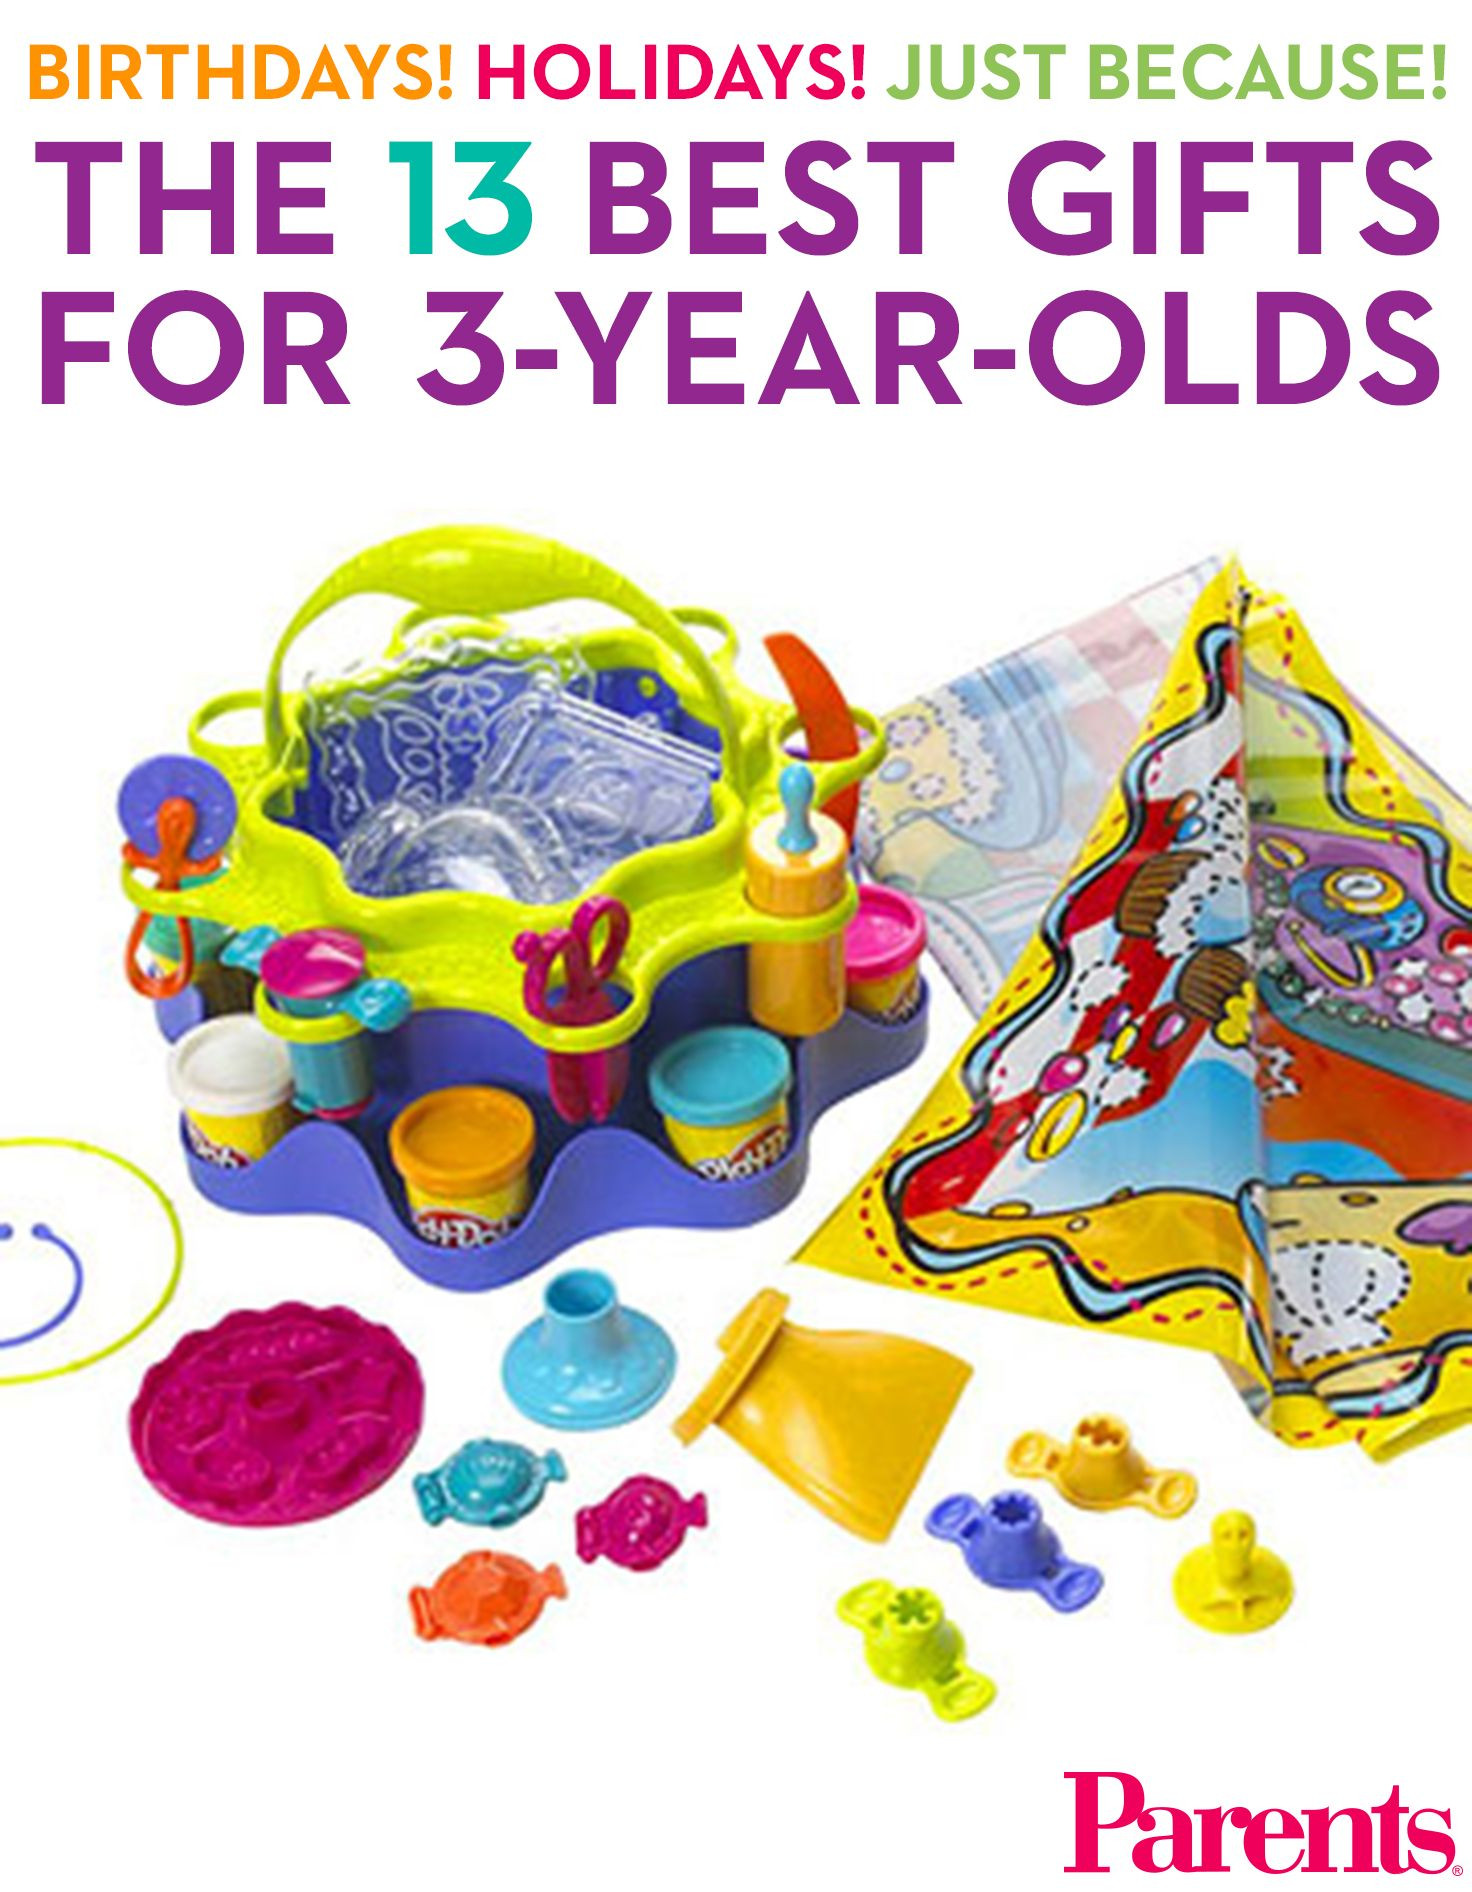 3 Year Old Birthday Gifts
 Best Gifts for 3 Year Olds